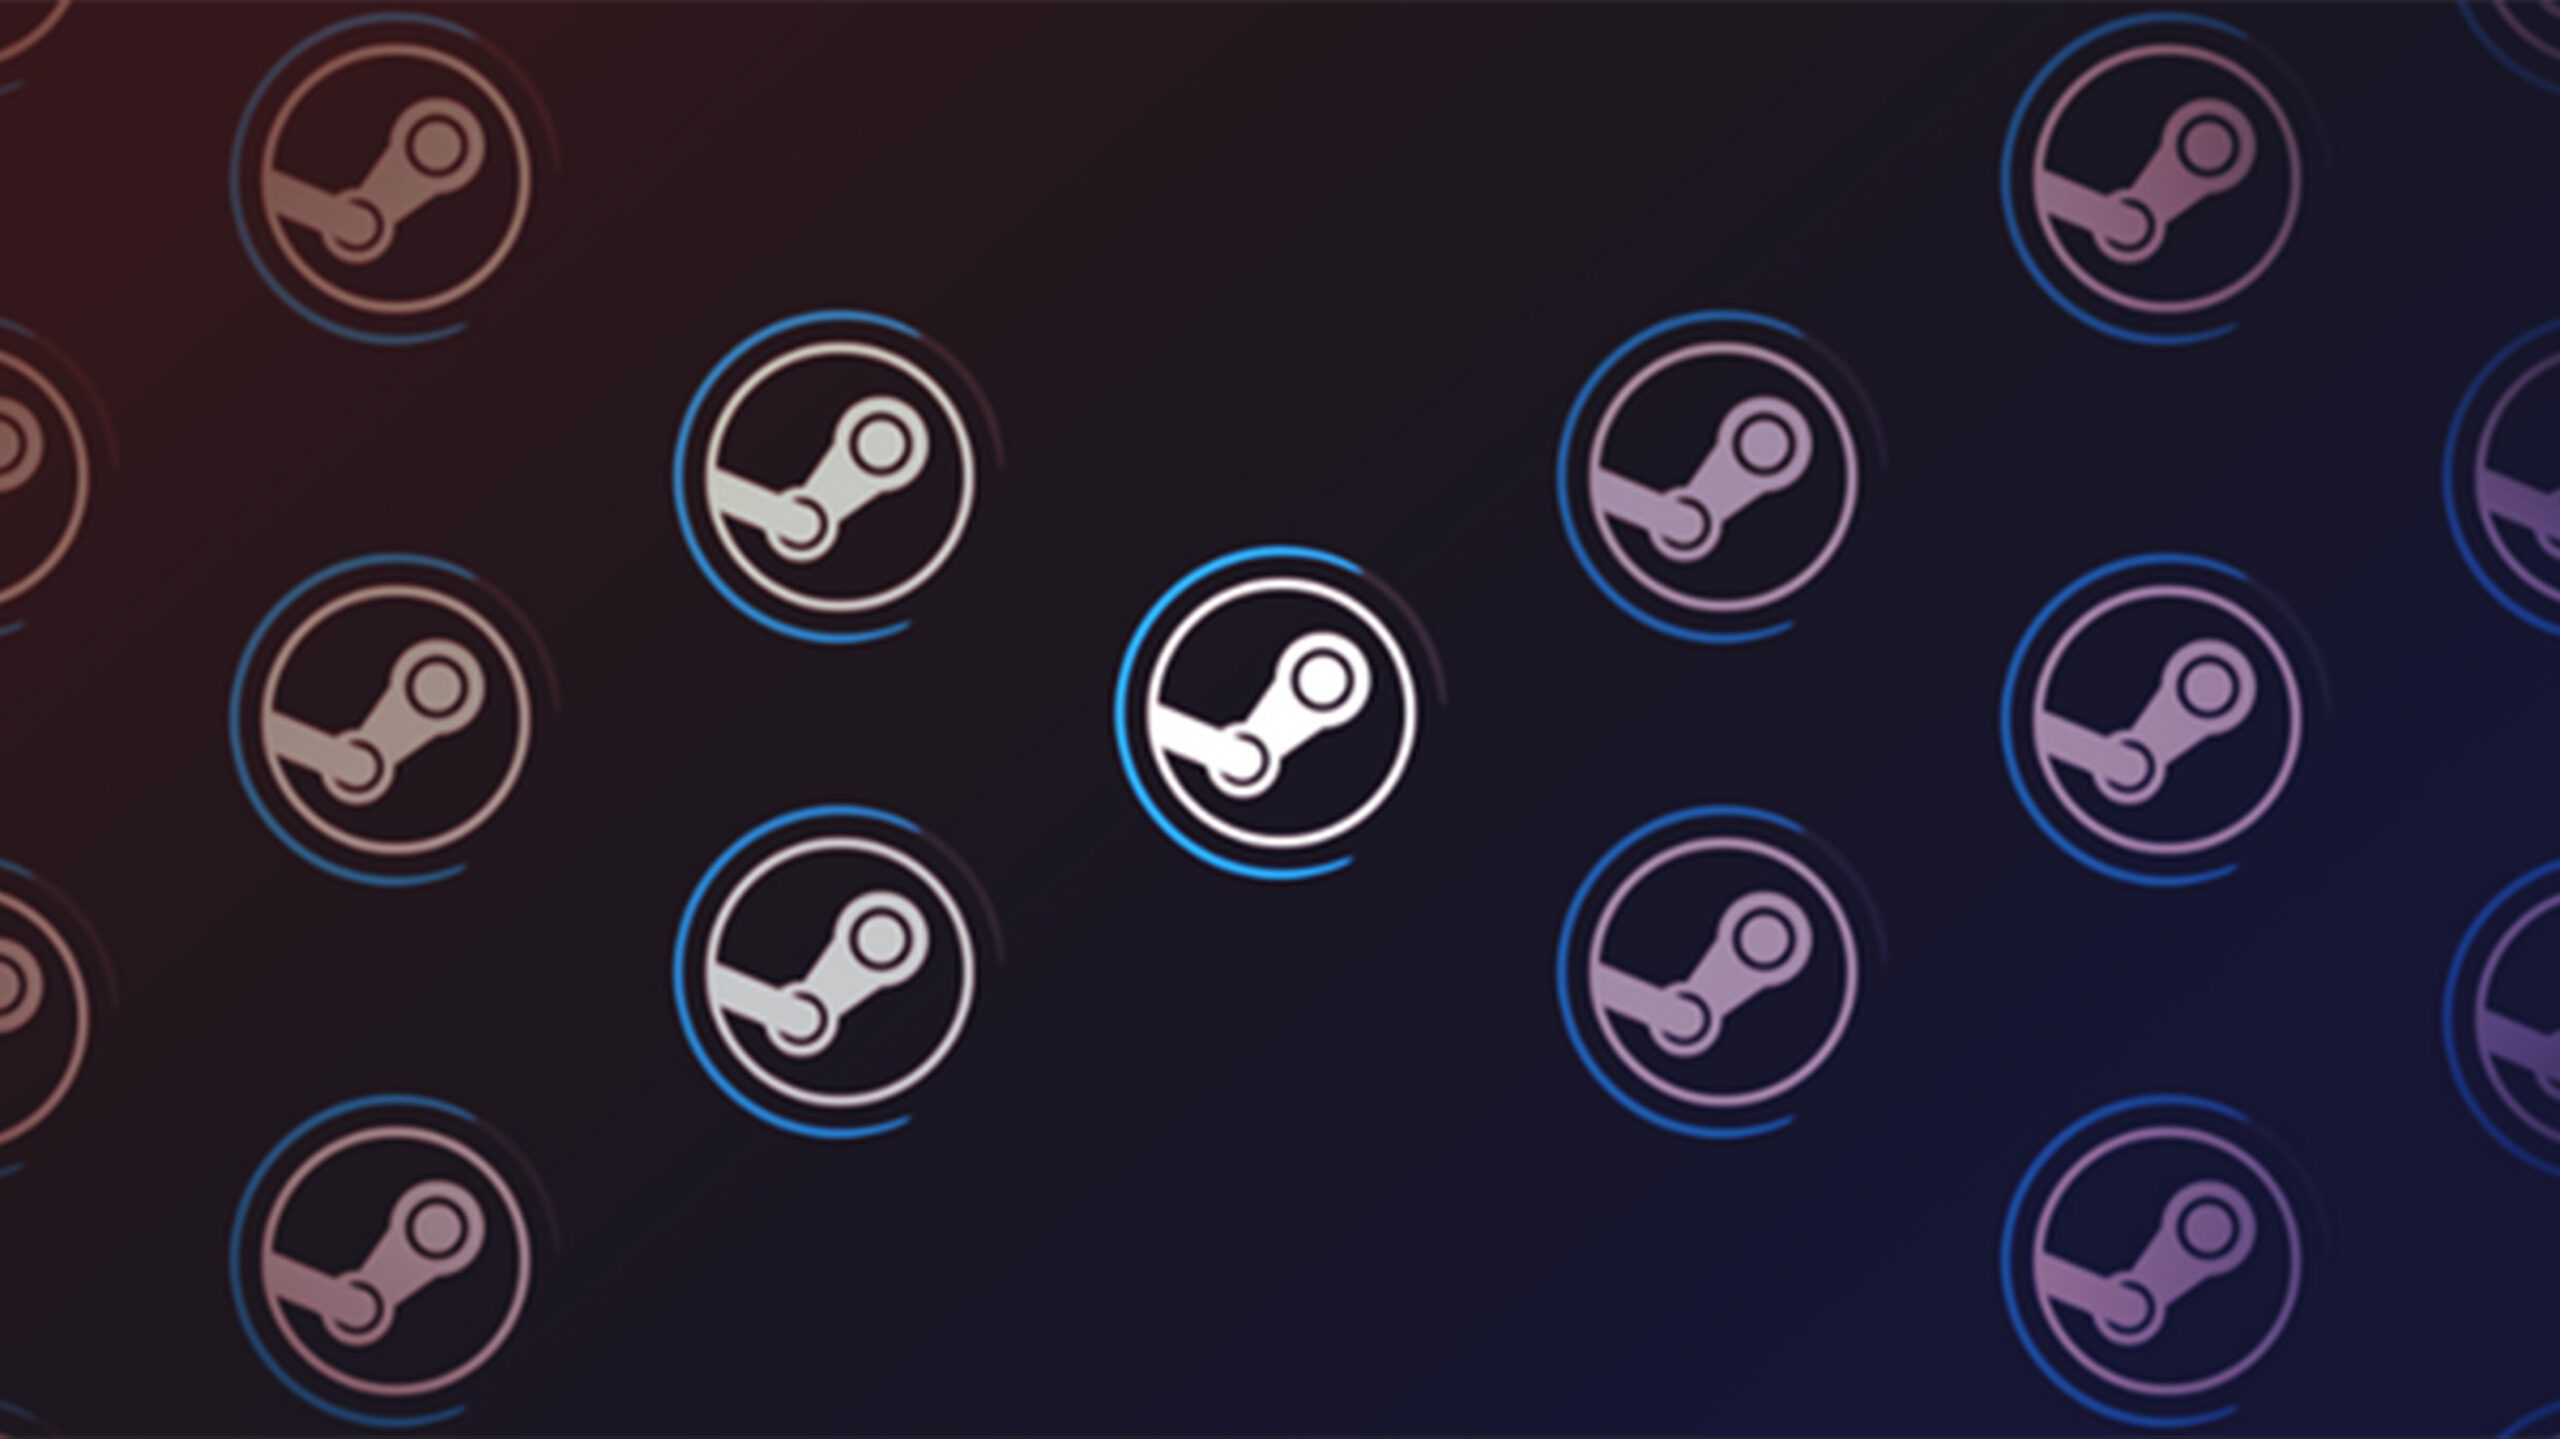 Valve overhauls the Steam Store with new categories, hubs and filtering